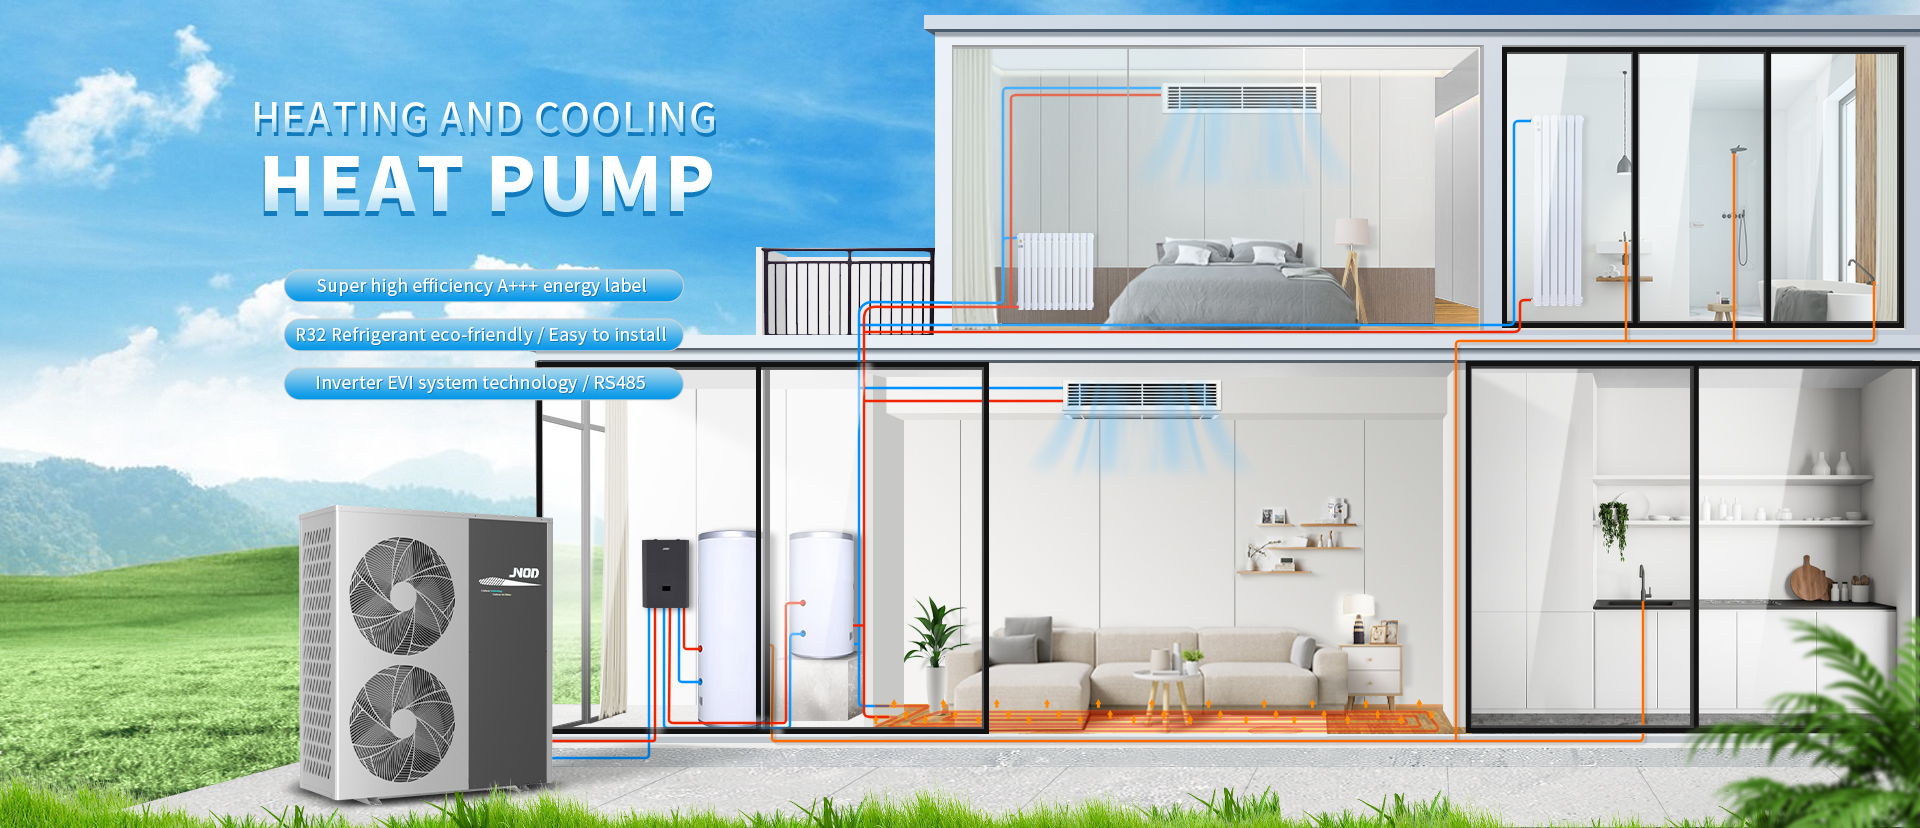 Heating And Cooling Heat Pump agency price